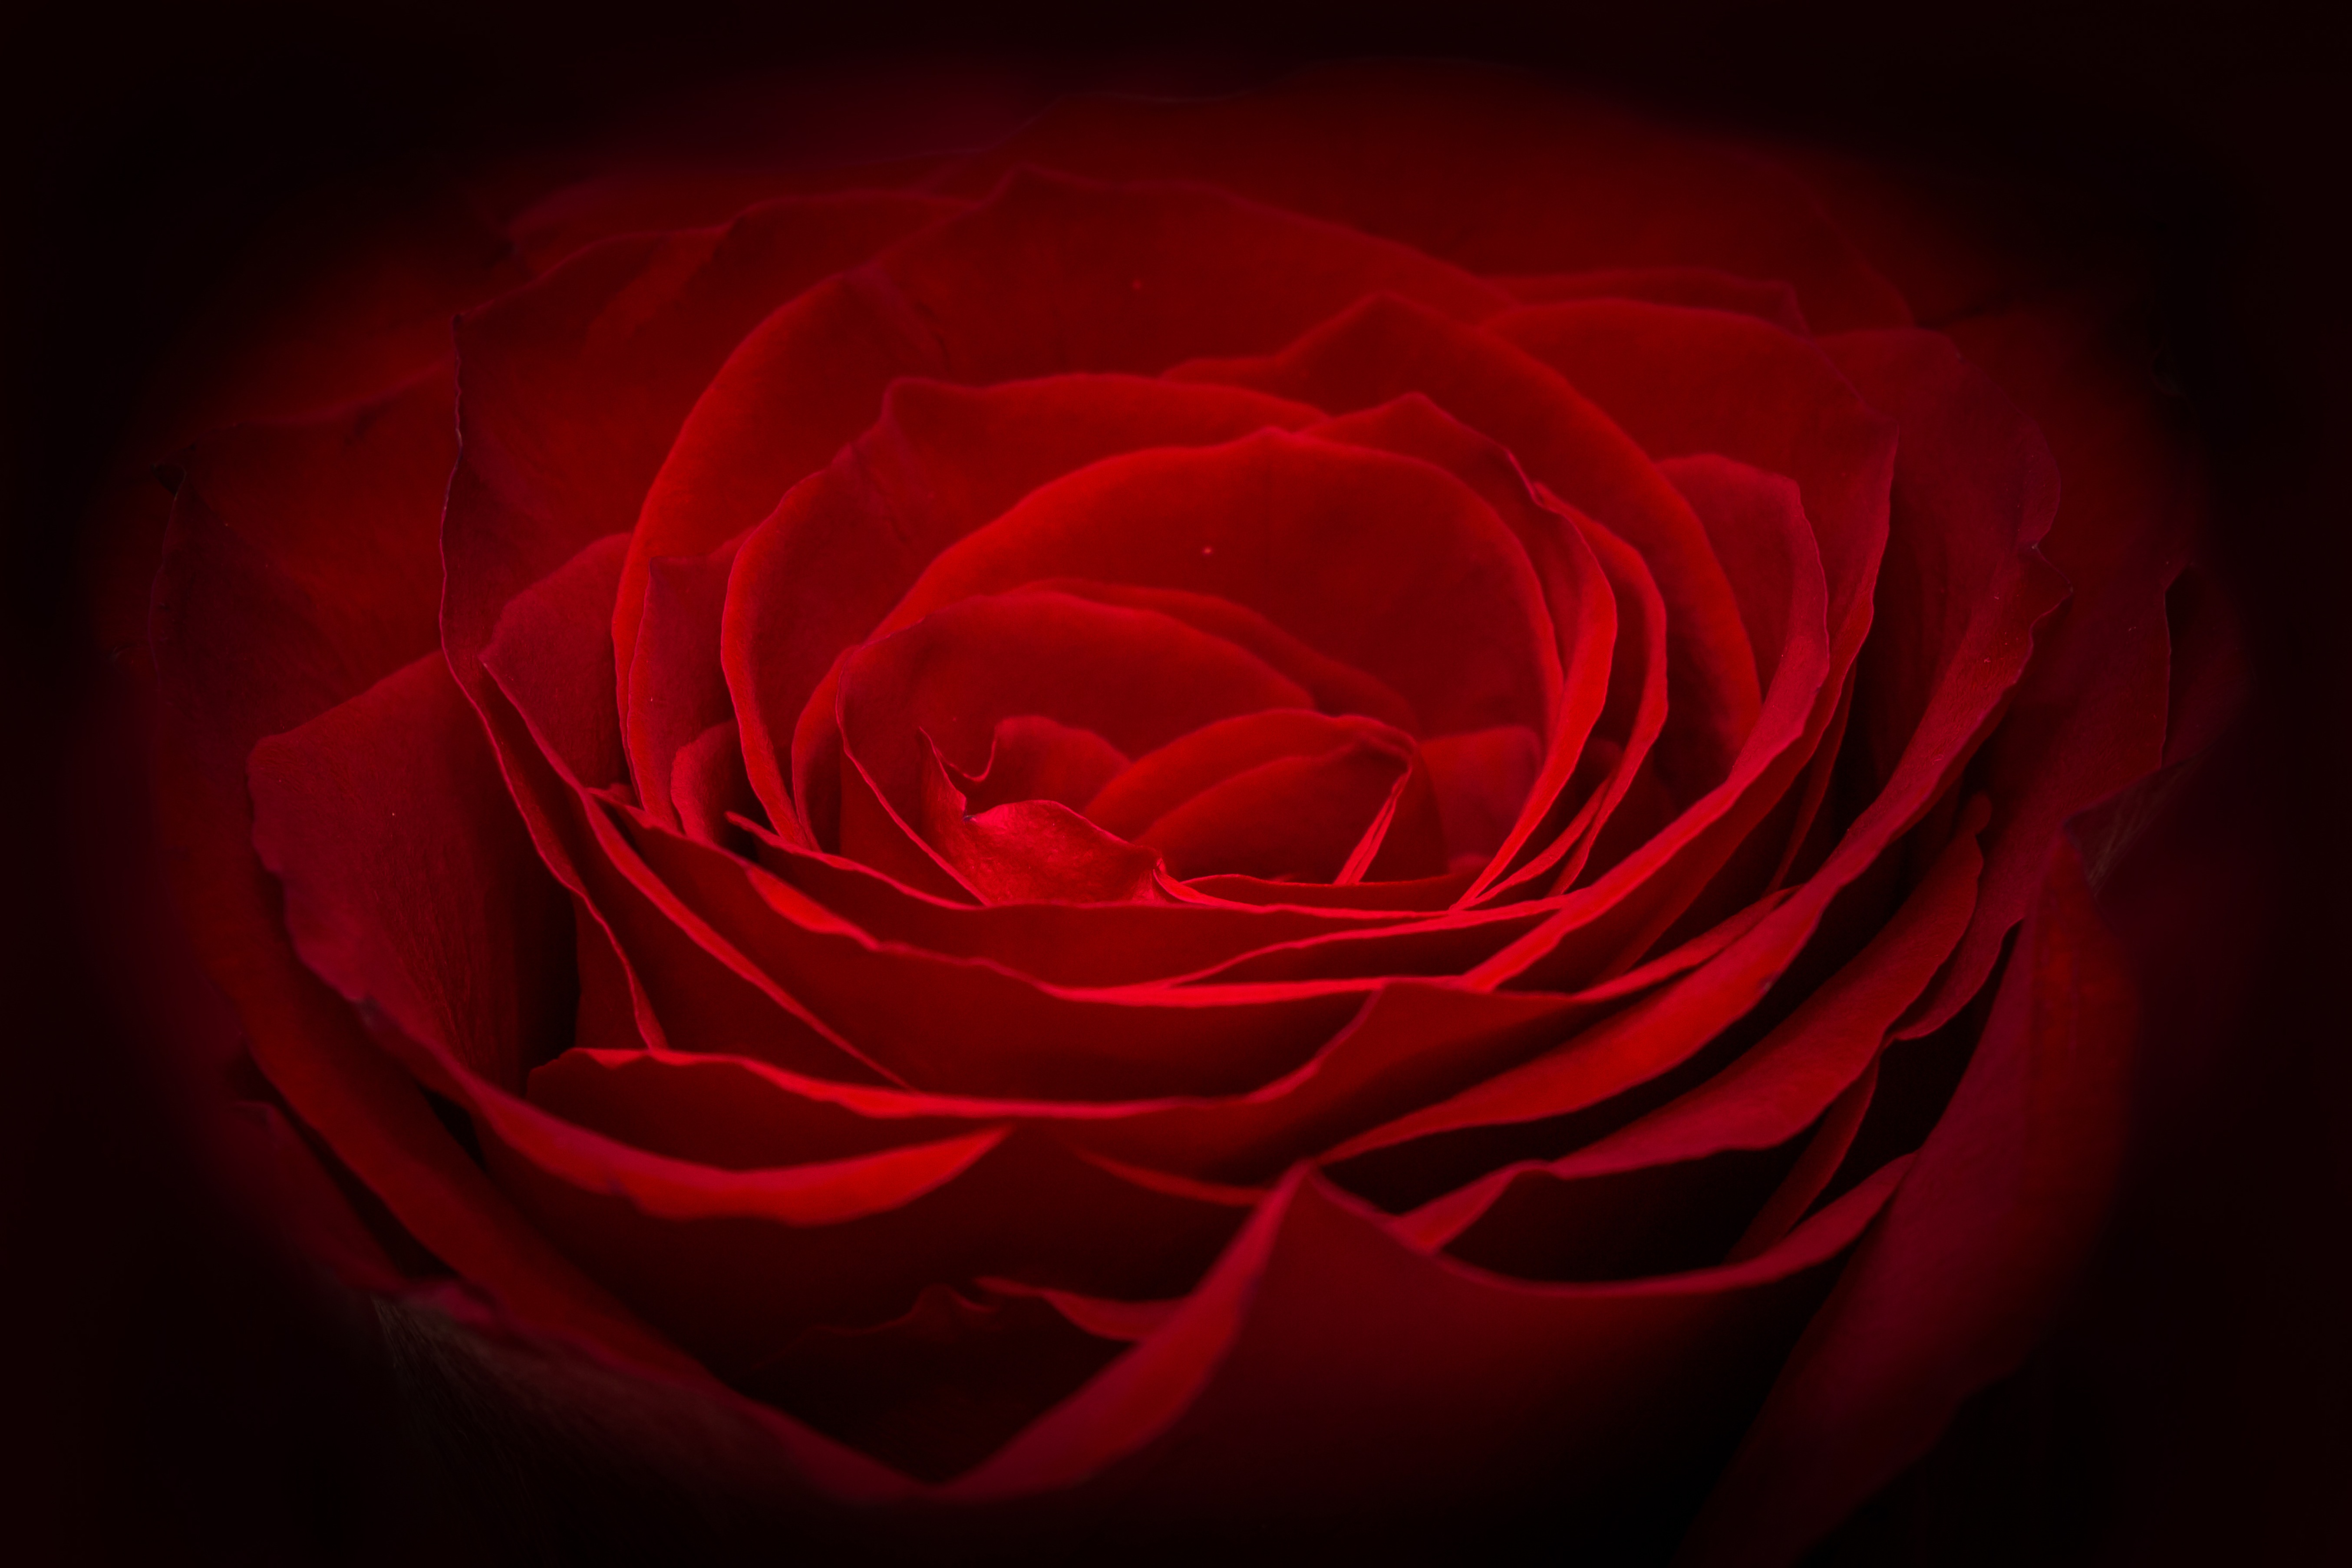 close up of red rose dark edges of image rich dark red